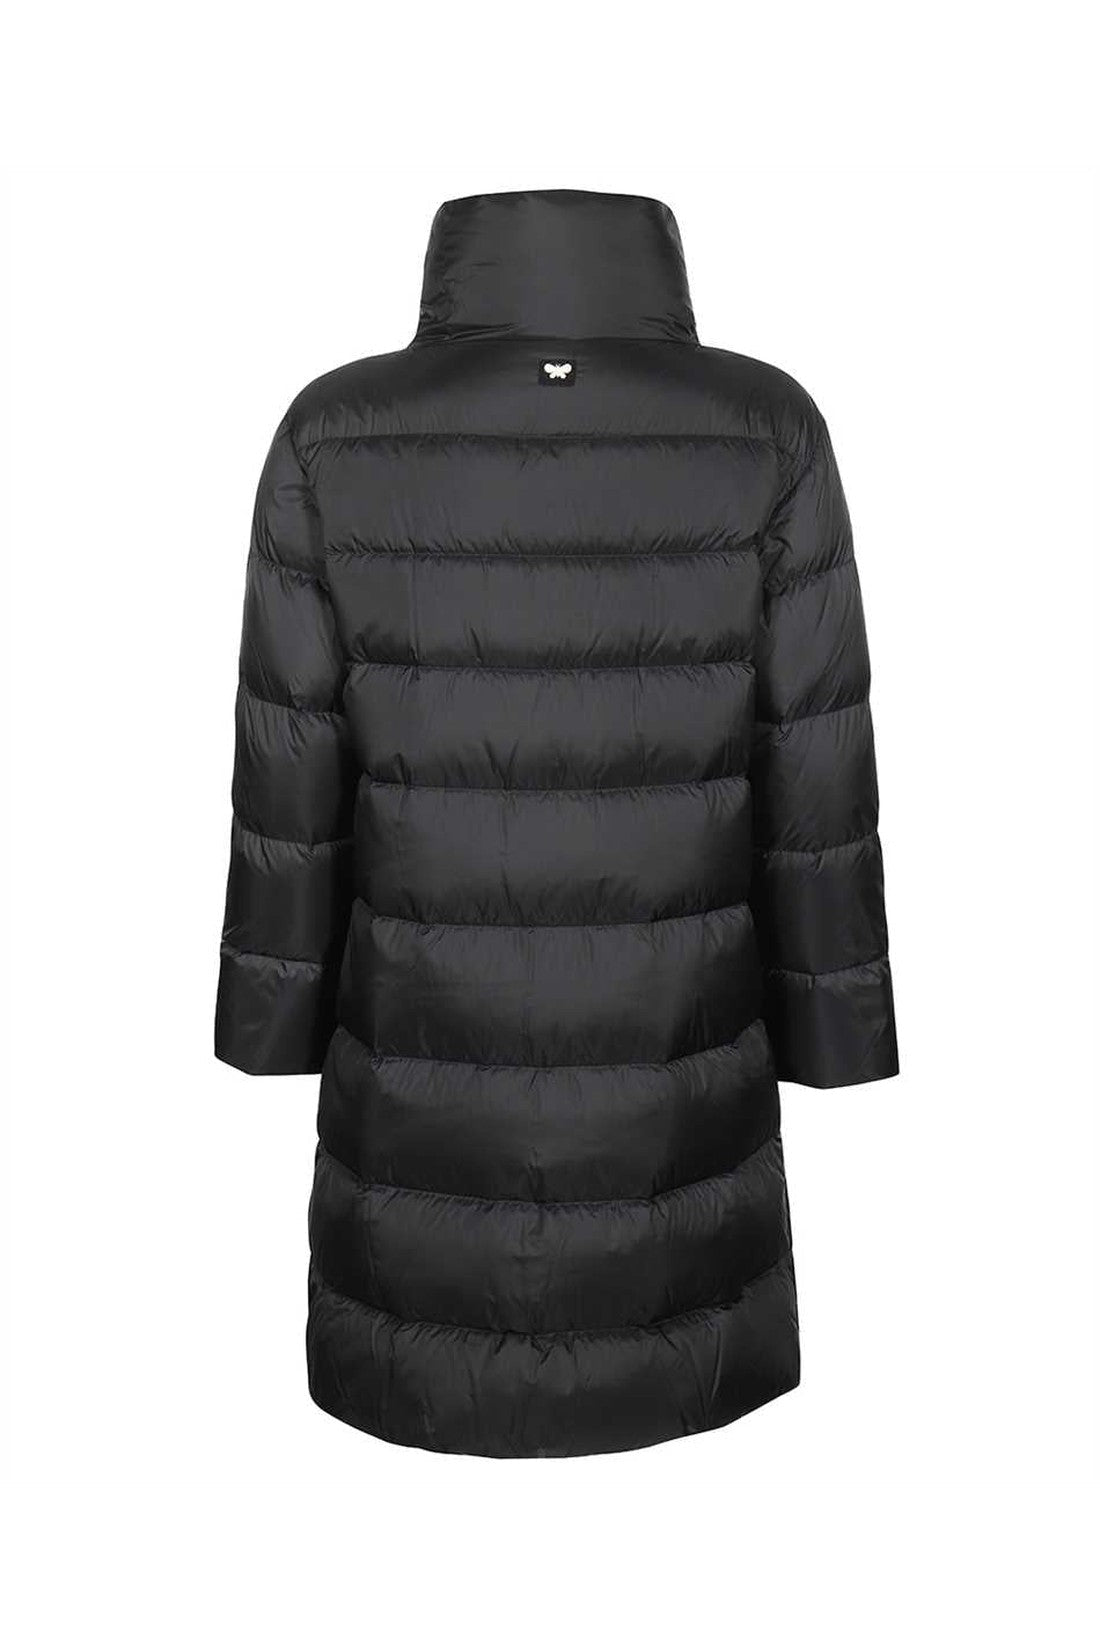 Long down jacket-Weekend Max Mara-OUTLET-SALE-ARCHIVIST